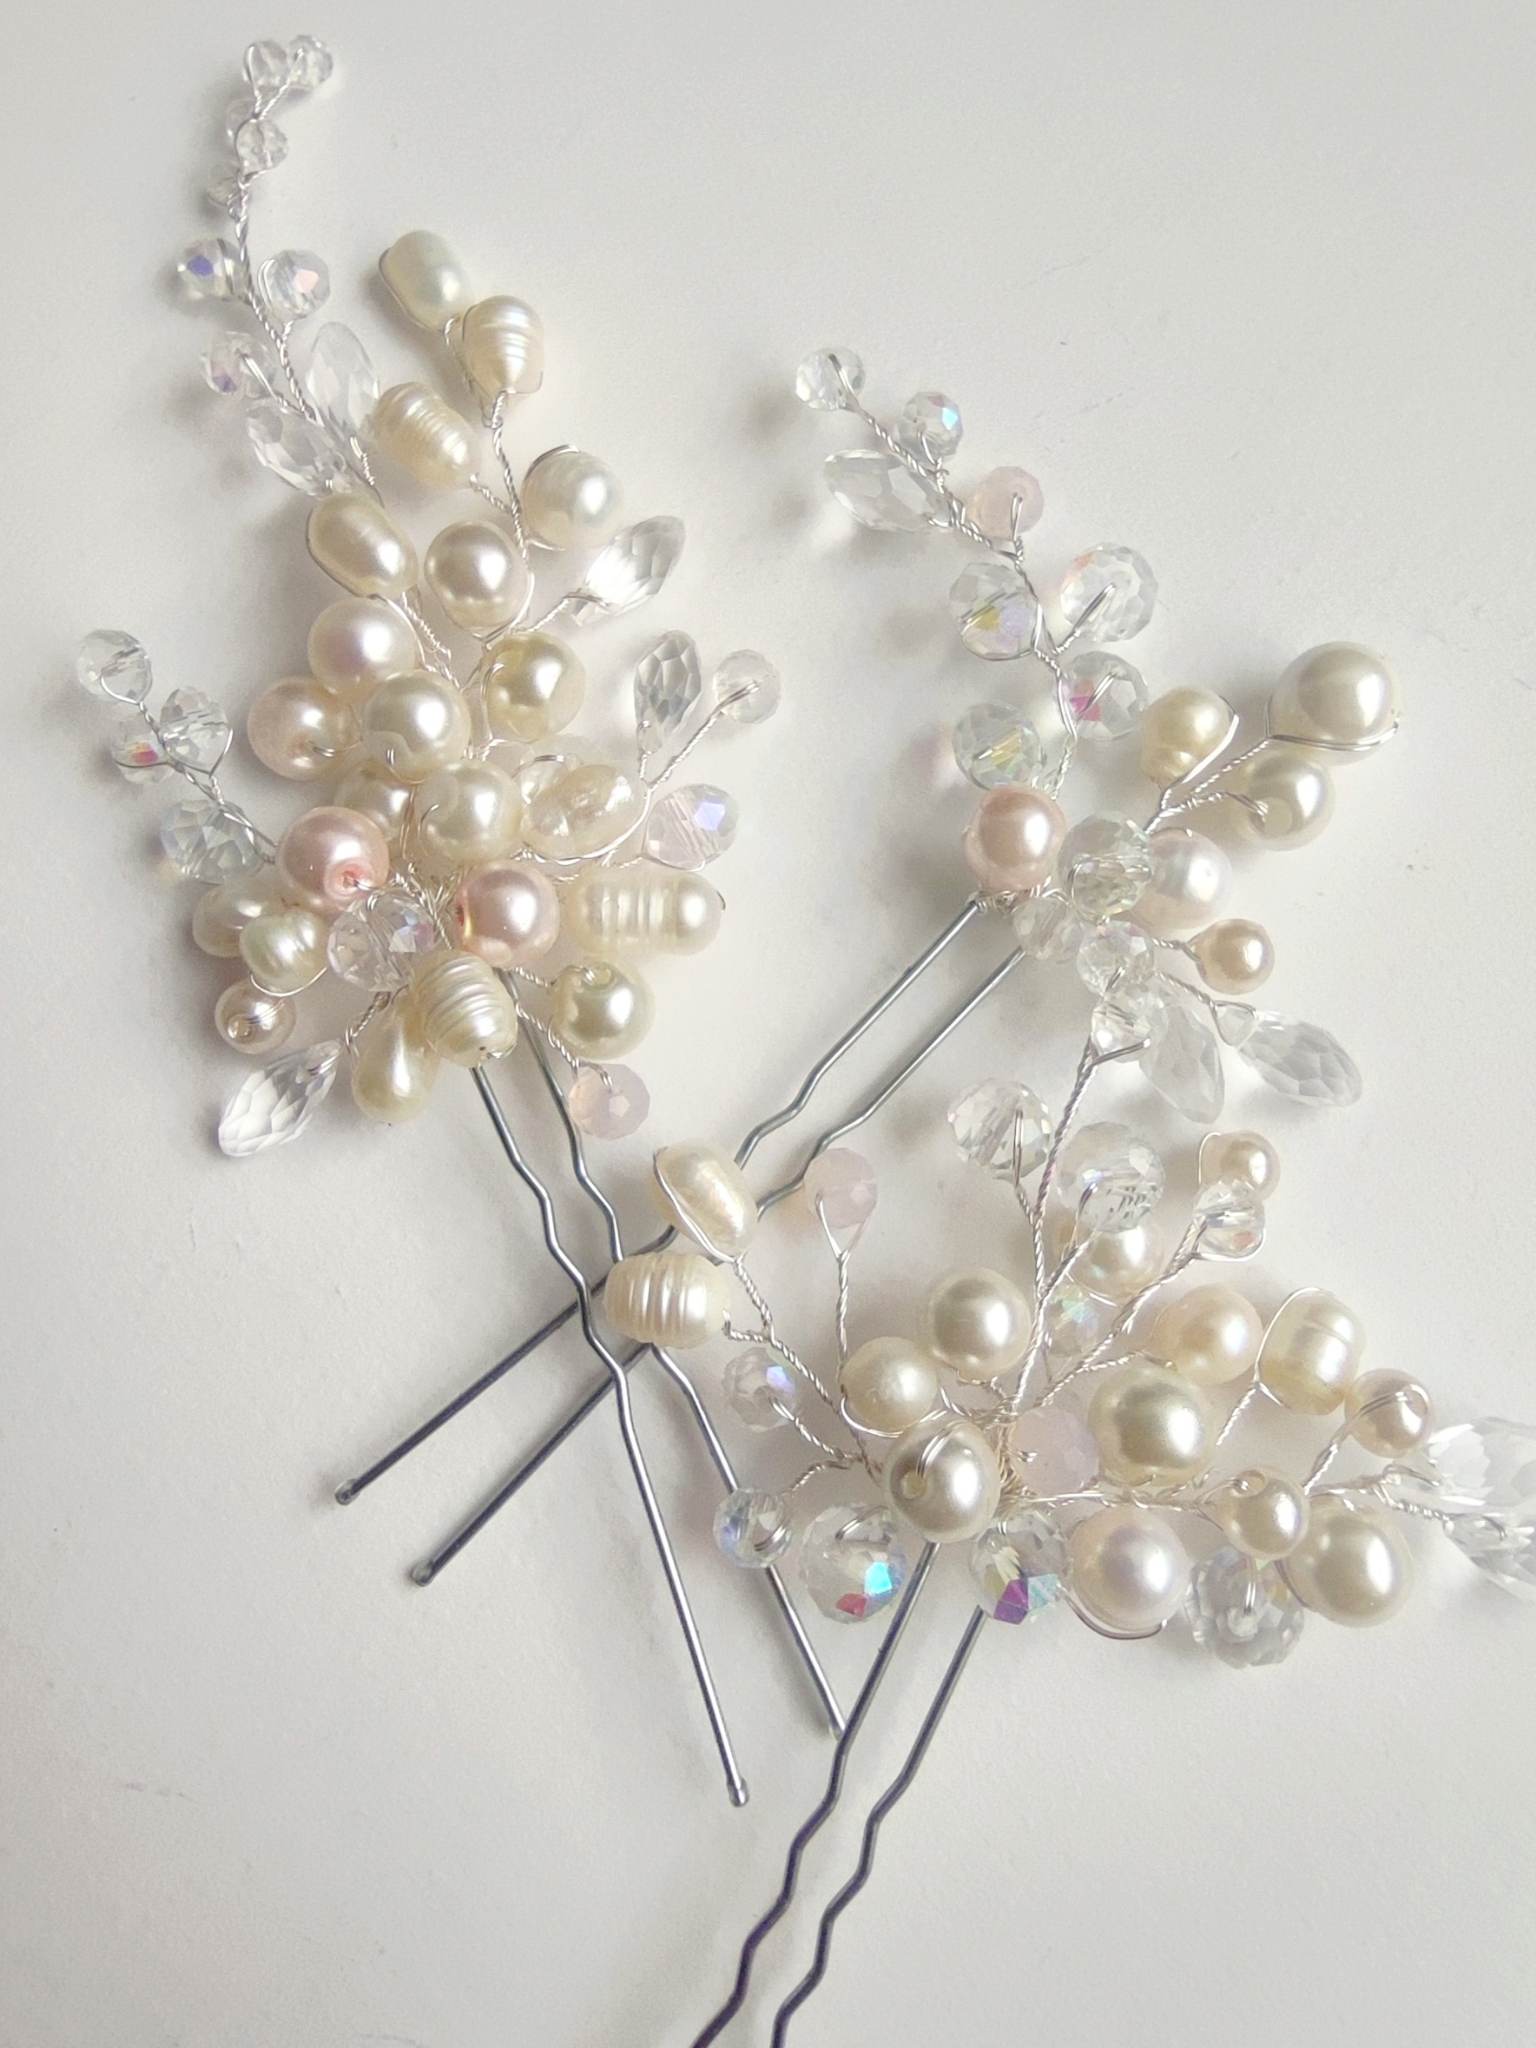 Beautiful Ivory Bridal Hair Pins set of 3 - with crystals and pearls